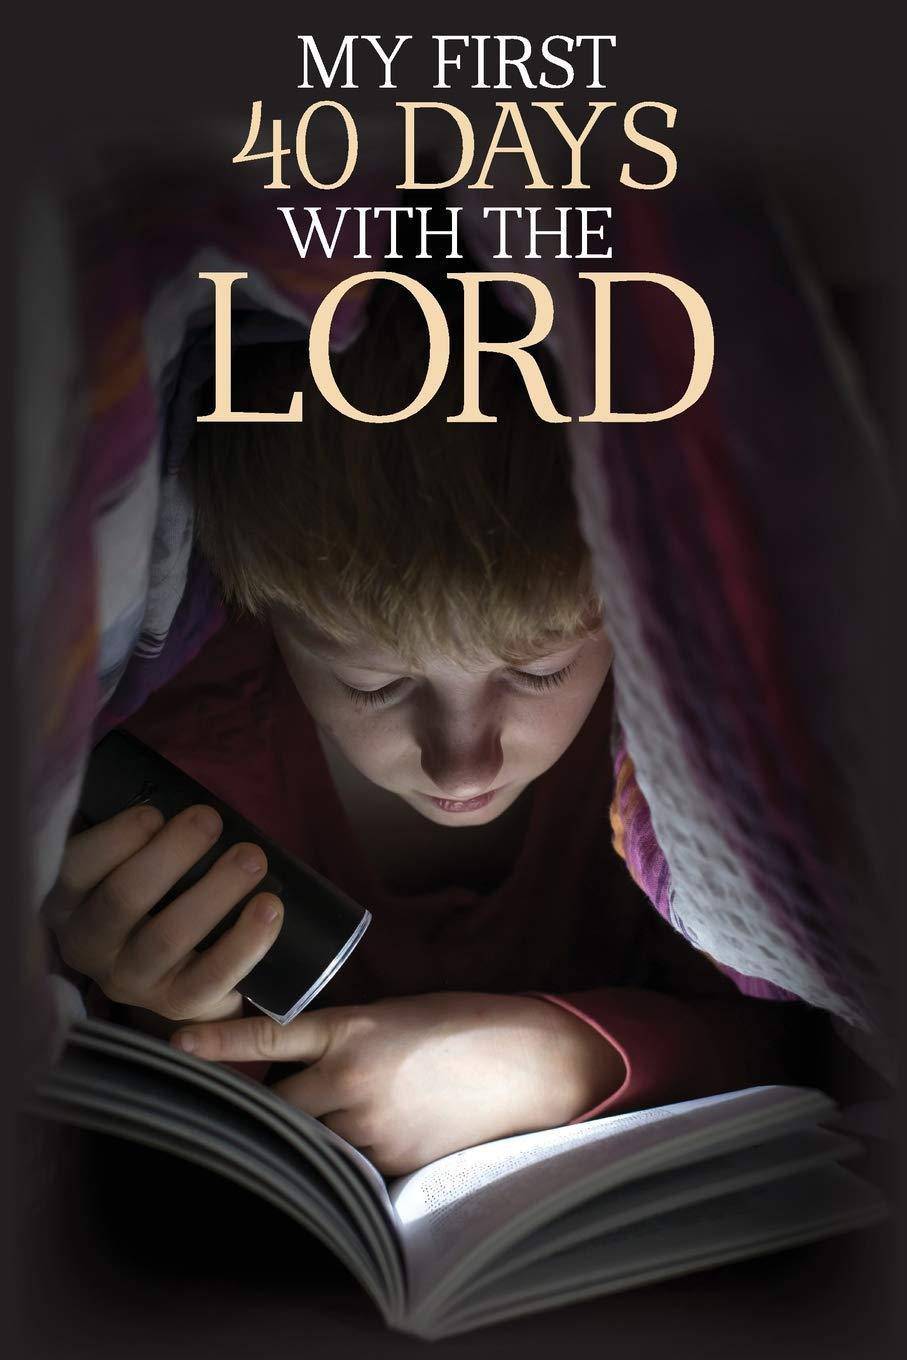 My First 40 Days with the Lord - SureShot Books Publishing LLC